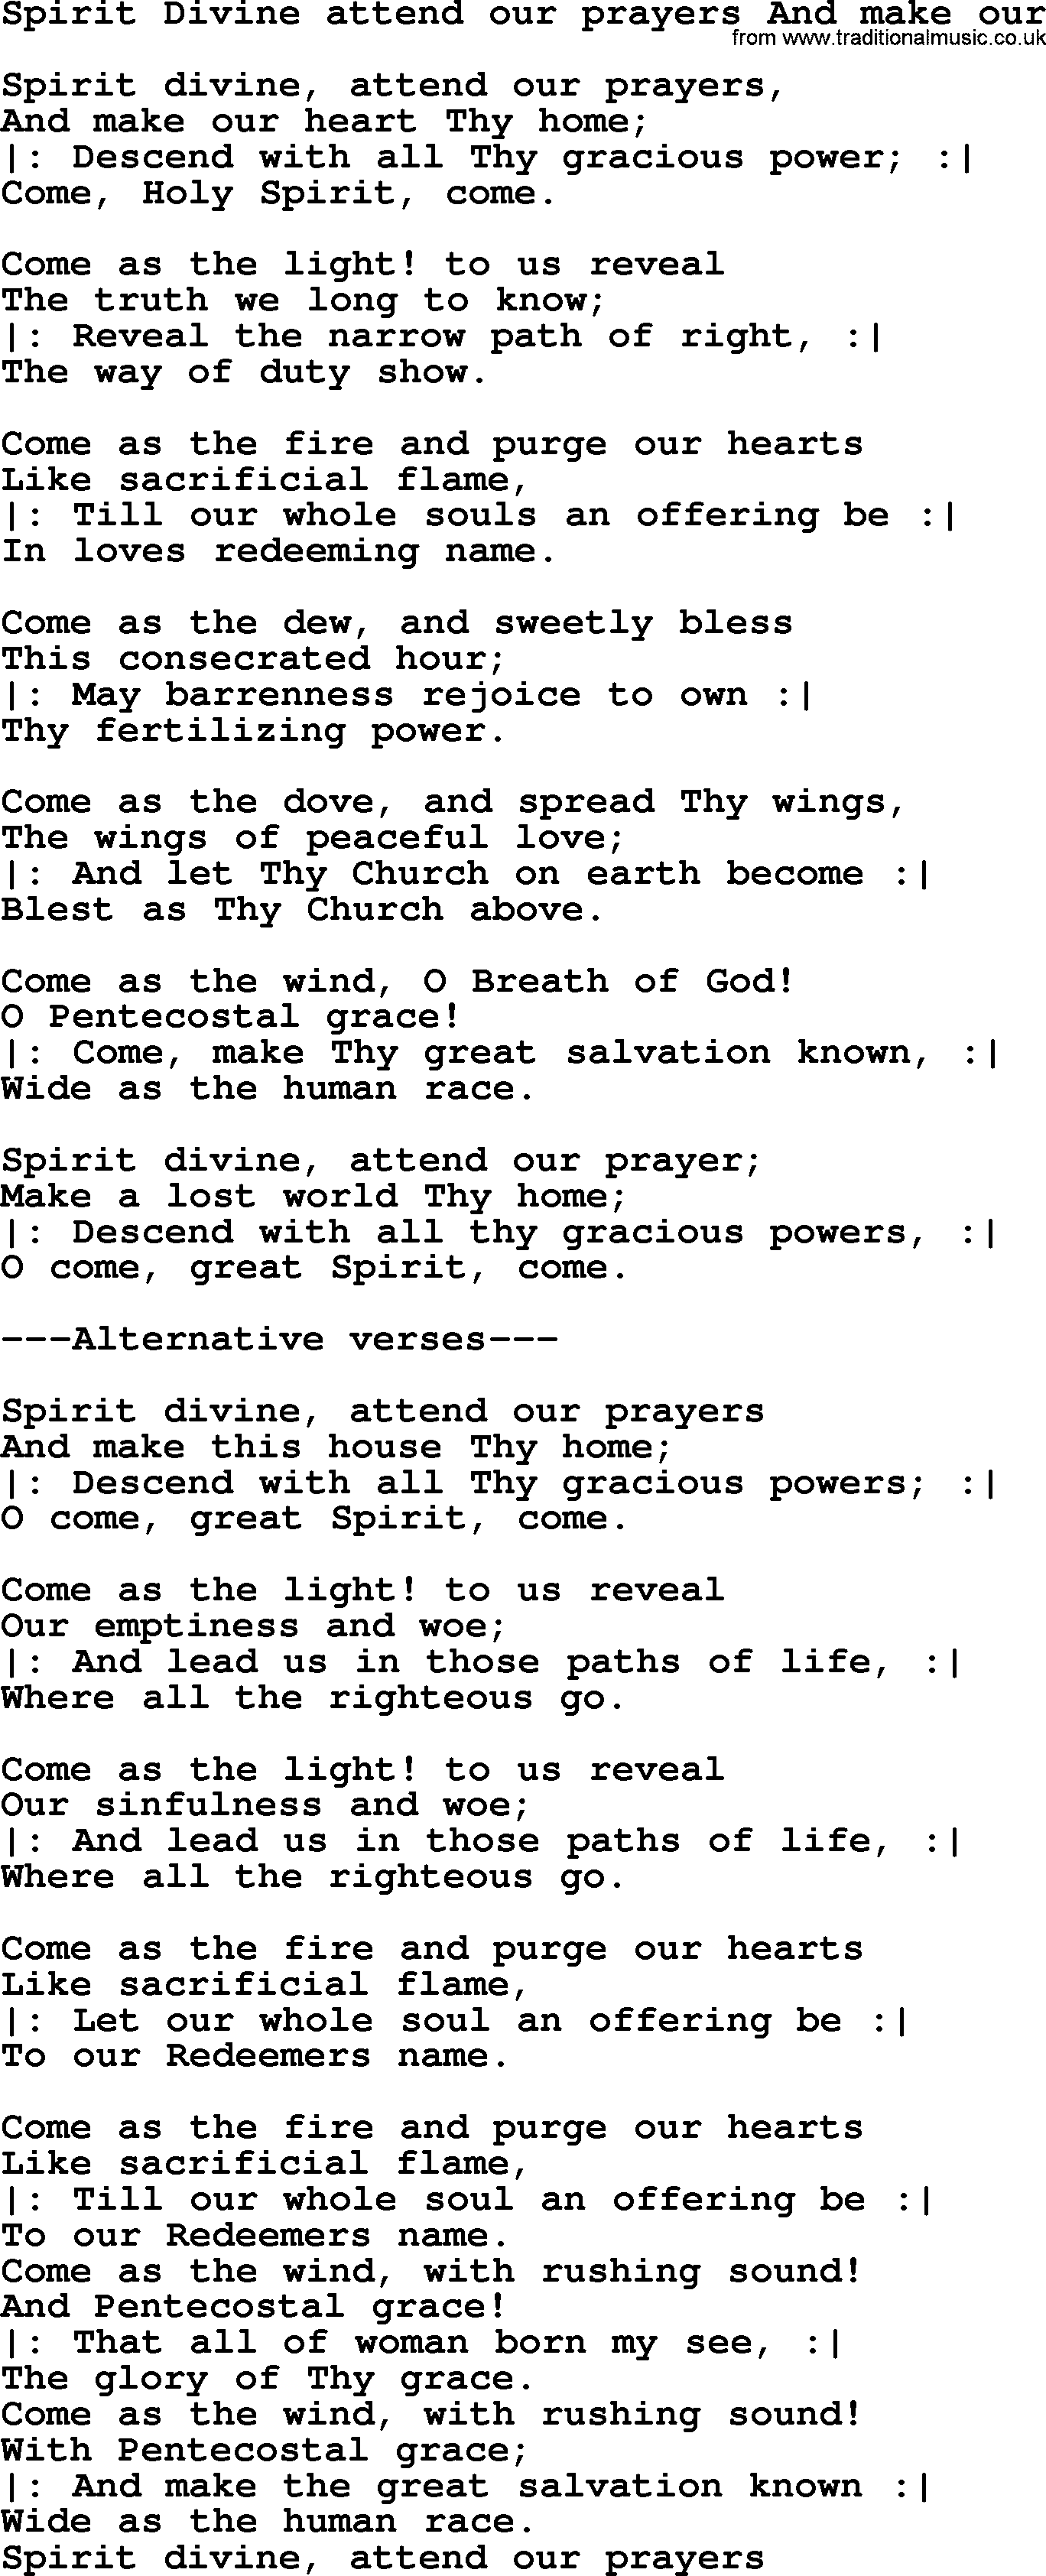 Presbyterian Hymns collection, Hymn: Spirit Divine Attend Our Prayers And Make Our, lyrics and PDF